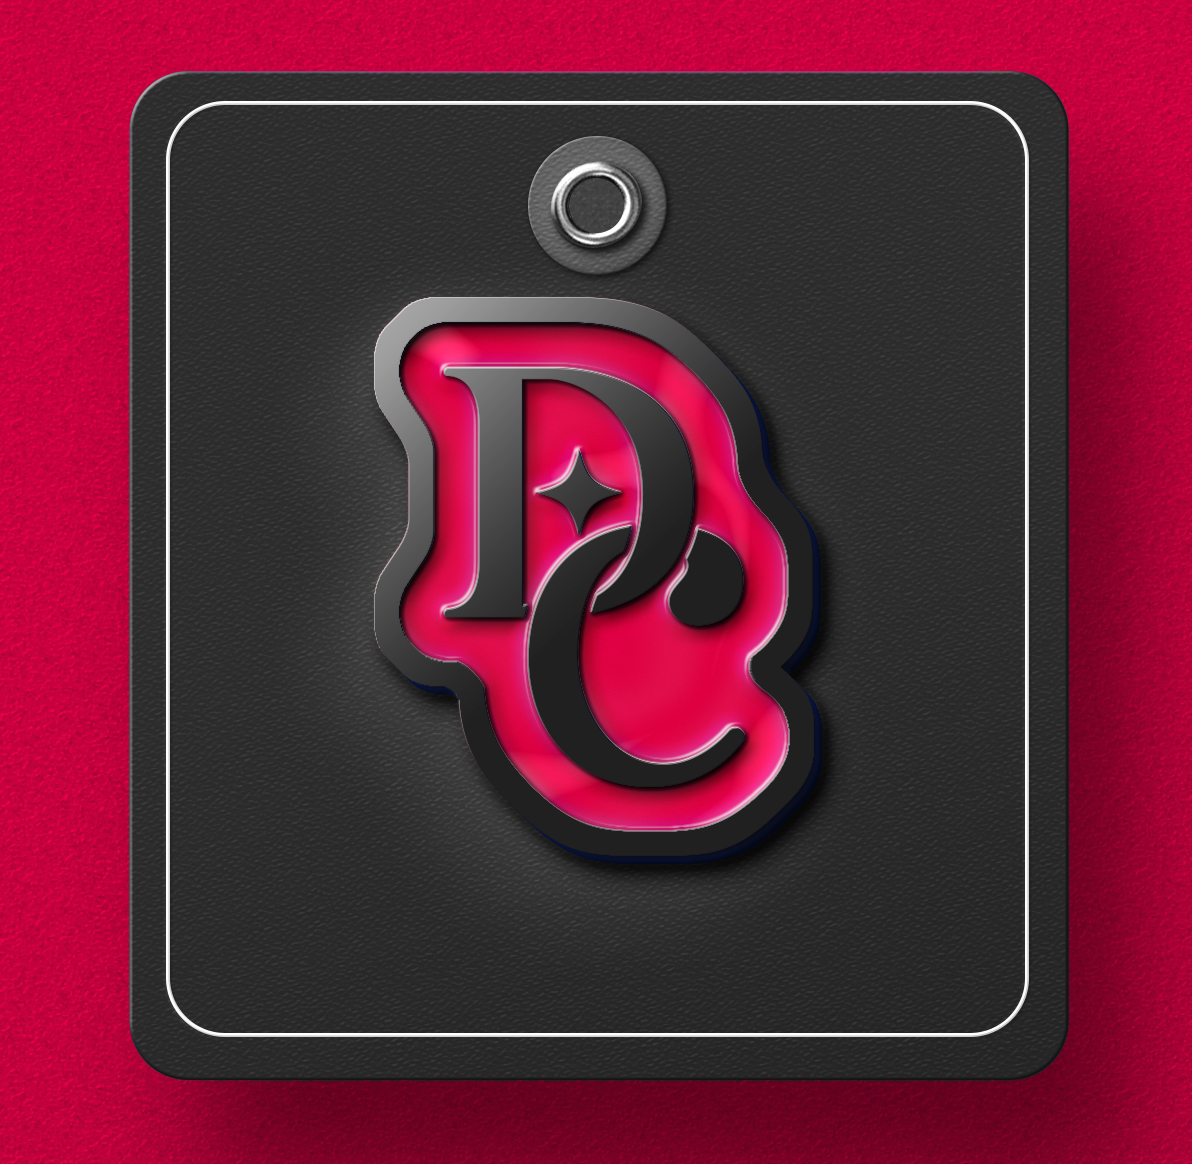 A logo mockup on an enamel pin. The logo has the letters DC and is red and black.